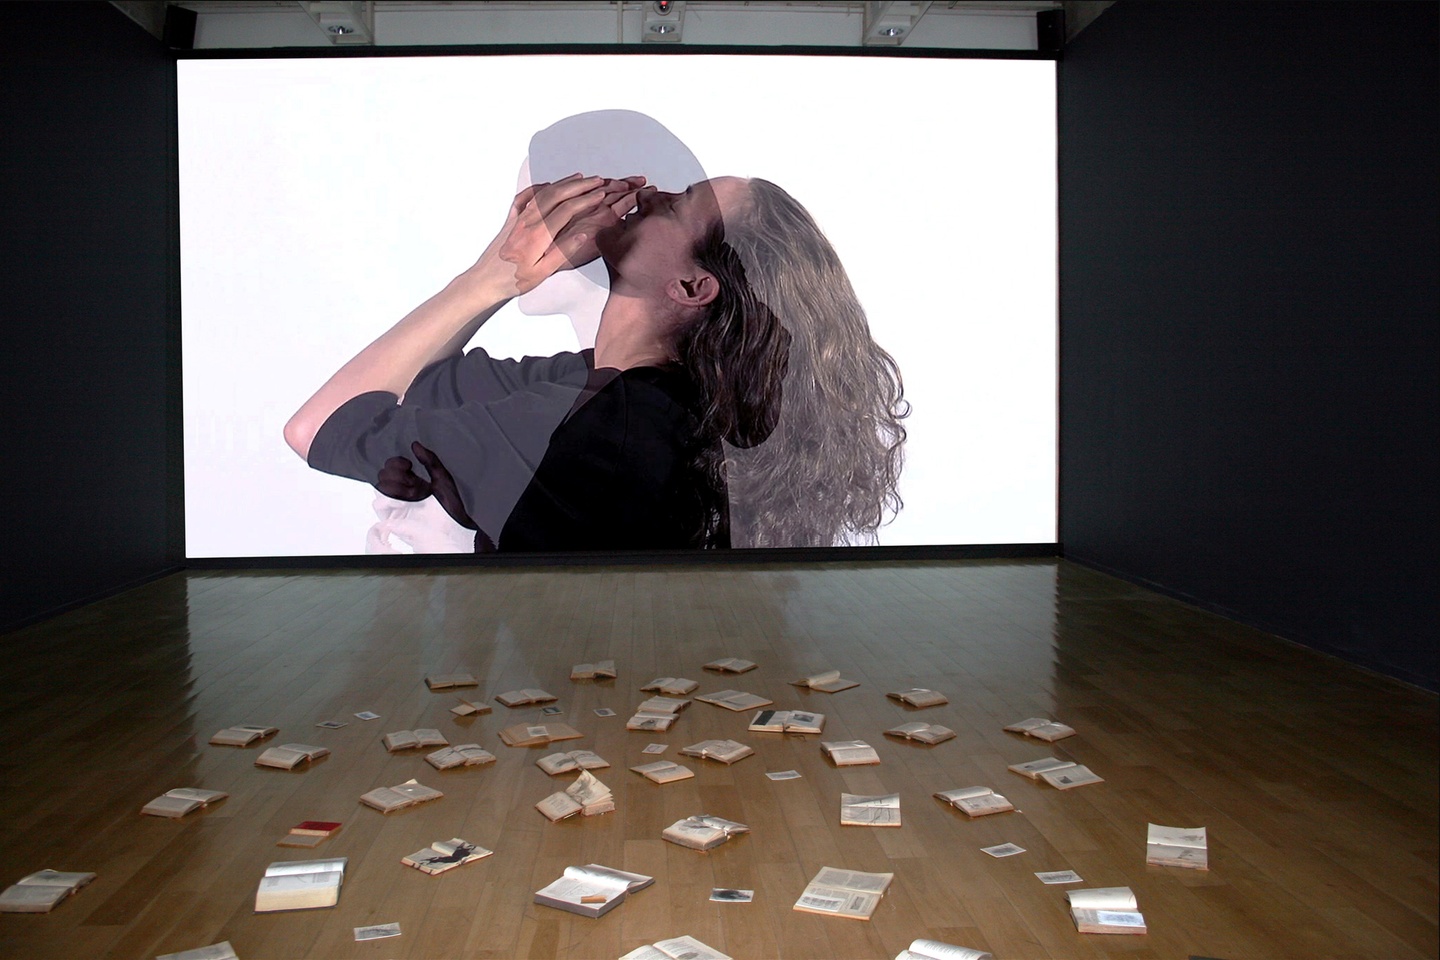 Installation view of a gallery: in the center, on the wall is a projection of a video; in this video are two figures in profile, overlapping; one person arches their head back, their hands holding their face; the overlaid image is of a person standing upright. The background of the video is white. Before this video in the foreground are scattered books, all laid out in open spreads. The lighting is dim in the background, illuminating the books closest to us.